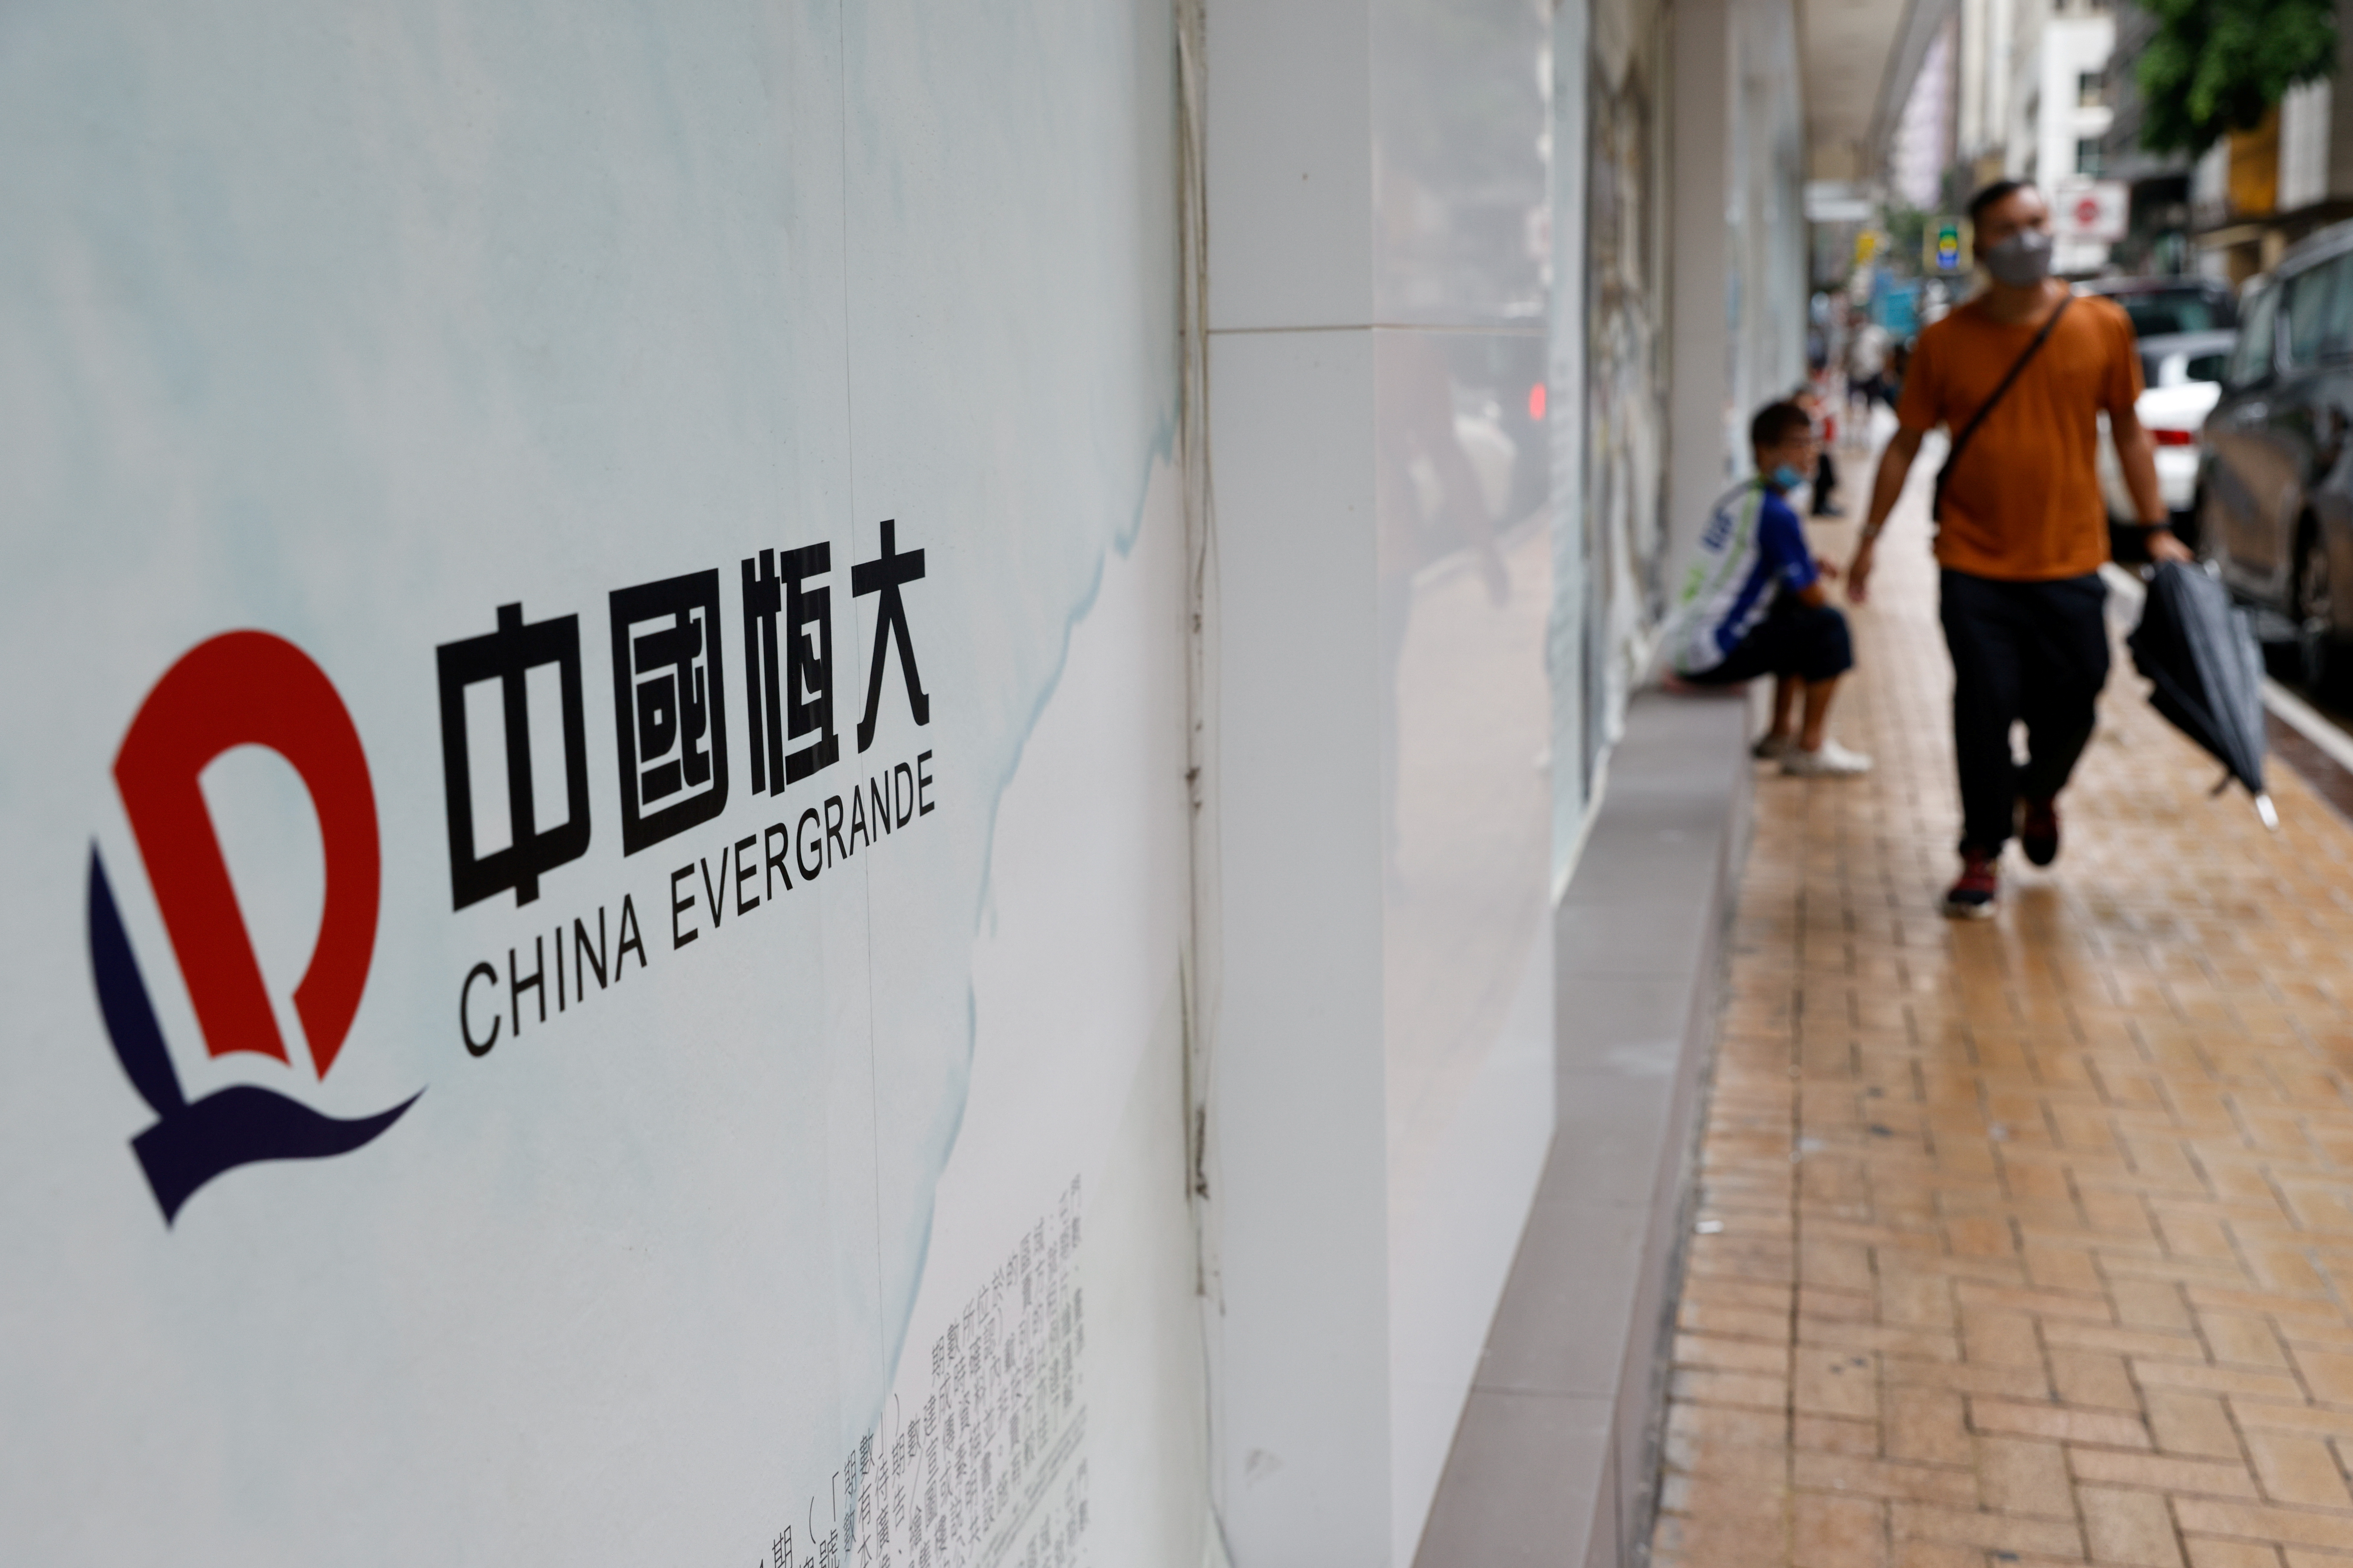 The logo of China Evergrande is seen at outside China Evergrande Centre building in Hong Kong